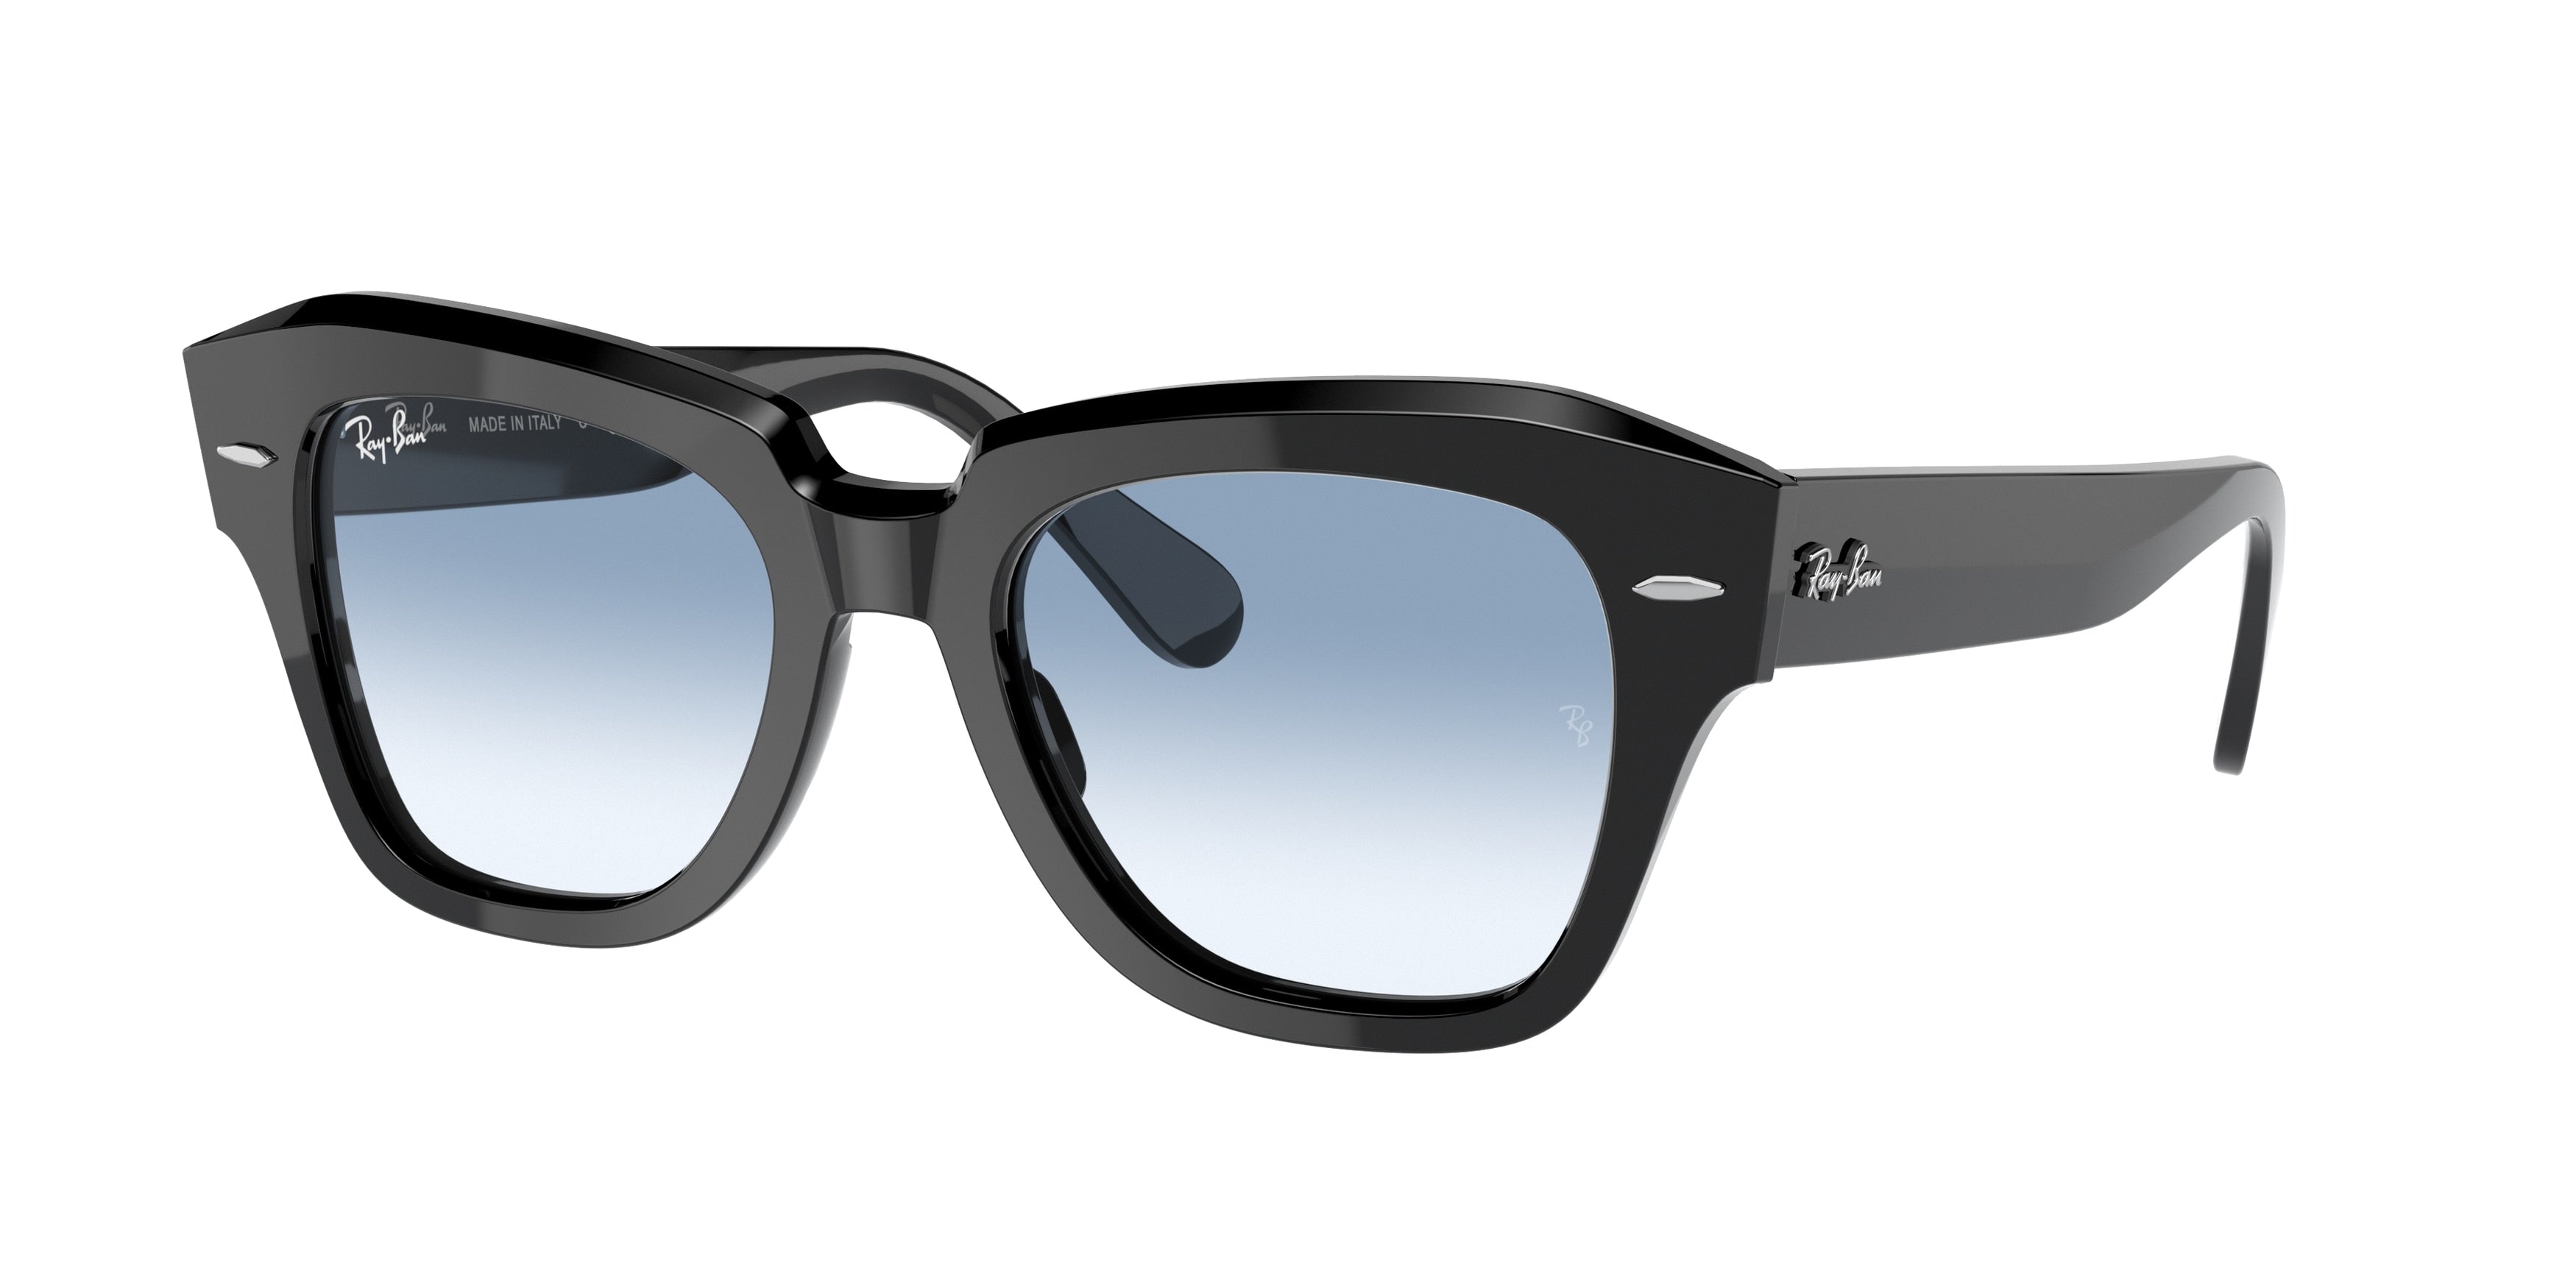 Ray-Ban STATE STREET RB2186 Square Sunglasses  901/3F-Black 49-145-20 - Color Map Black